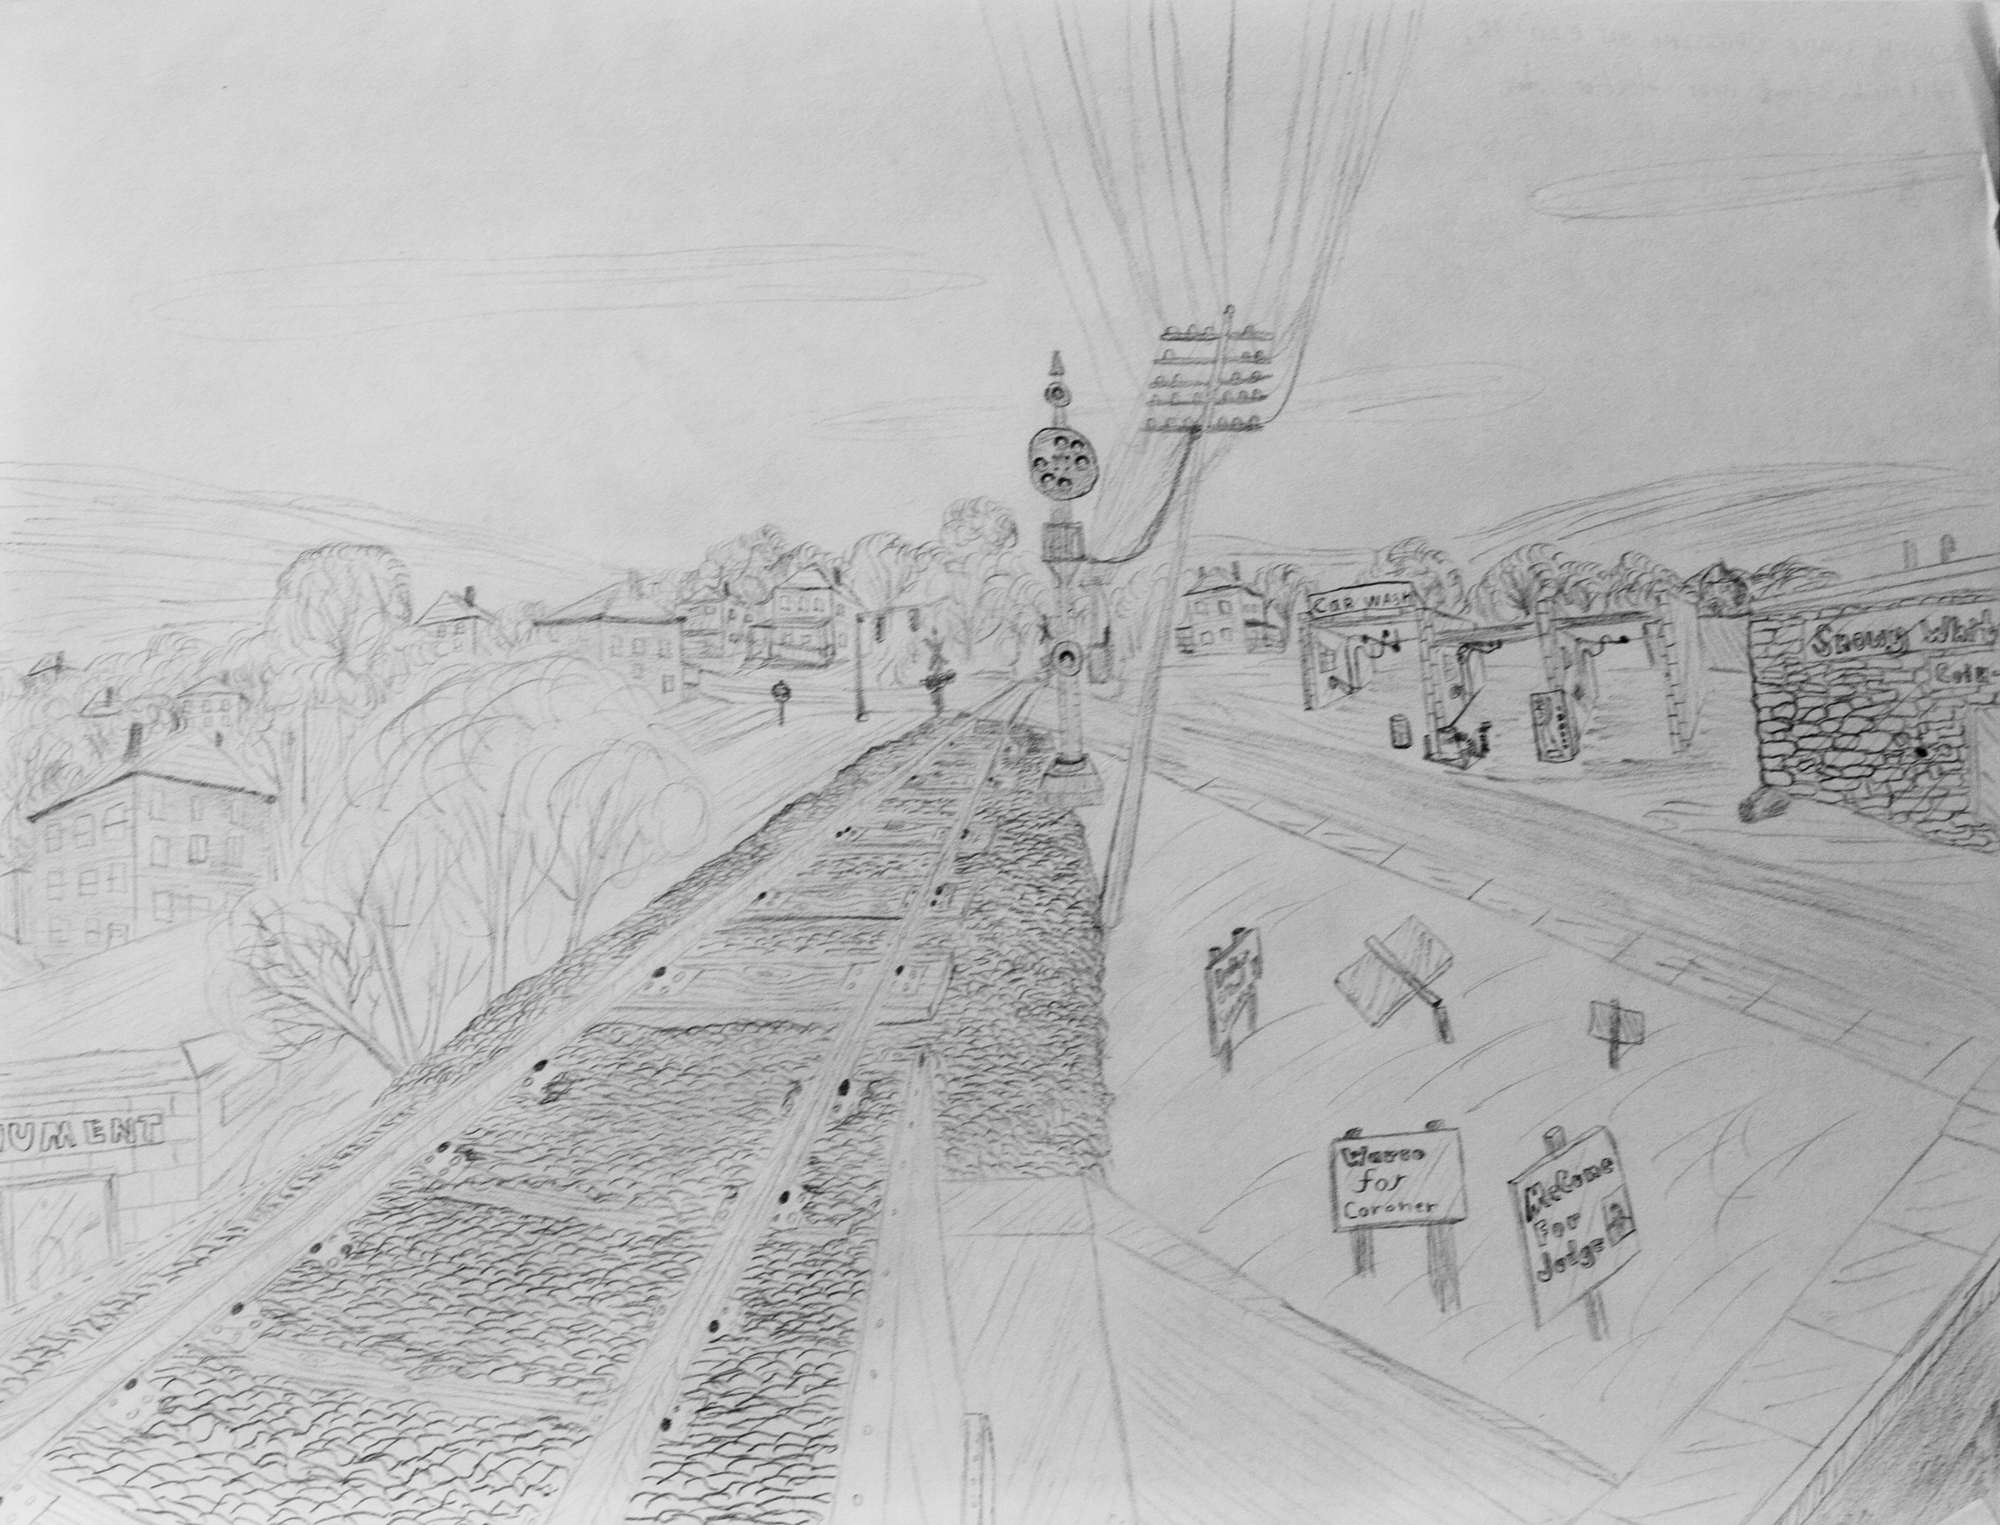 Railroad tracks at South Wade and East Maiden in Washington, PA pencil sketch